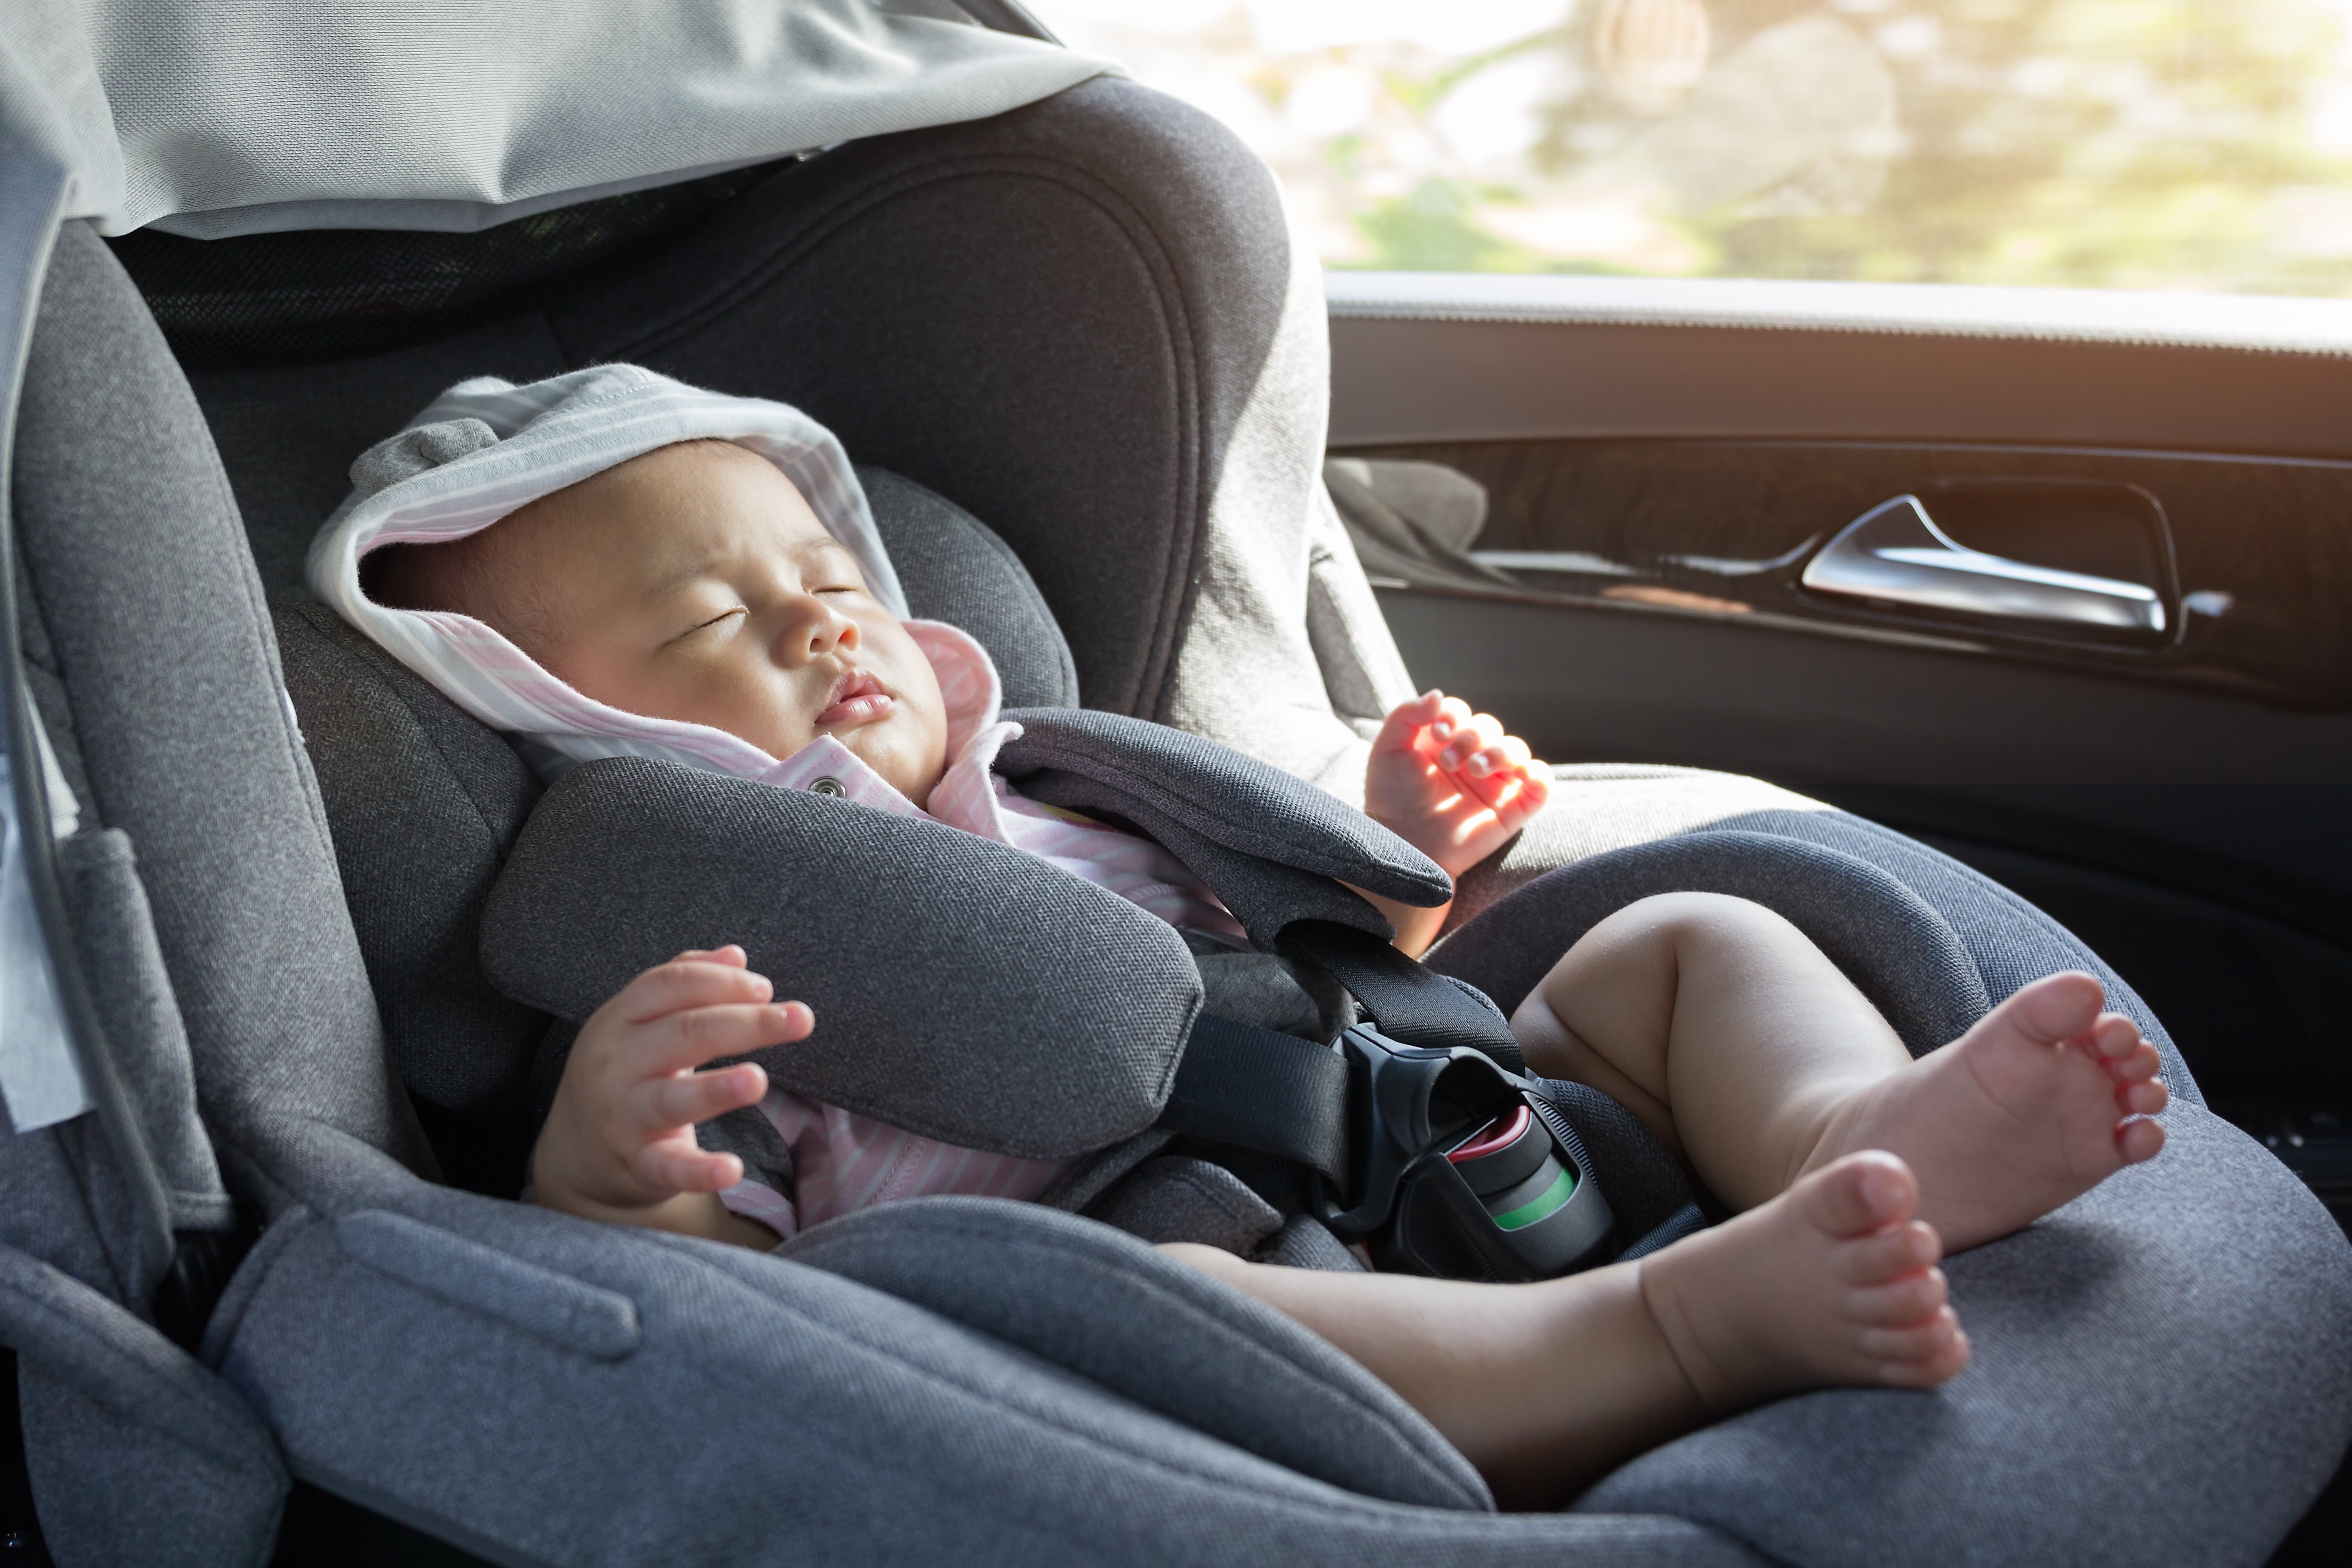 Common Questions About Pa Car Seat Laws, What Is The Law On Infant Car Seats